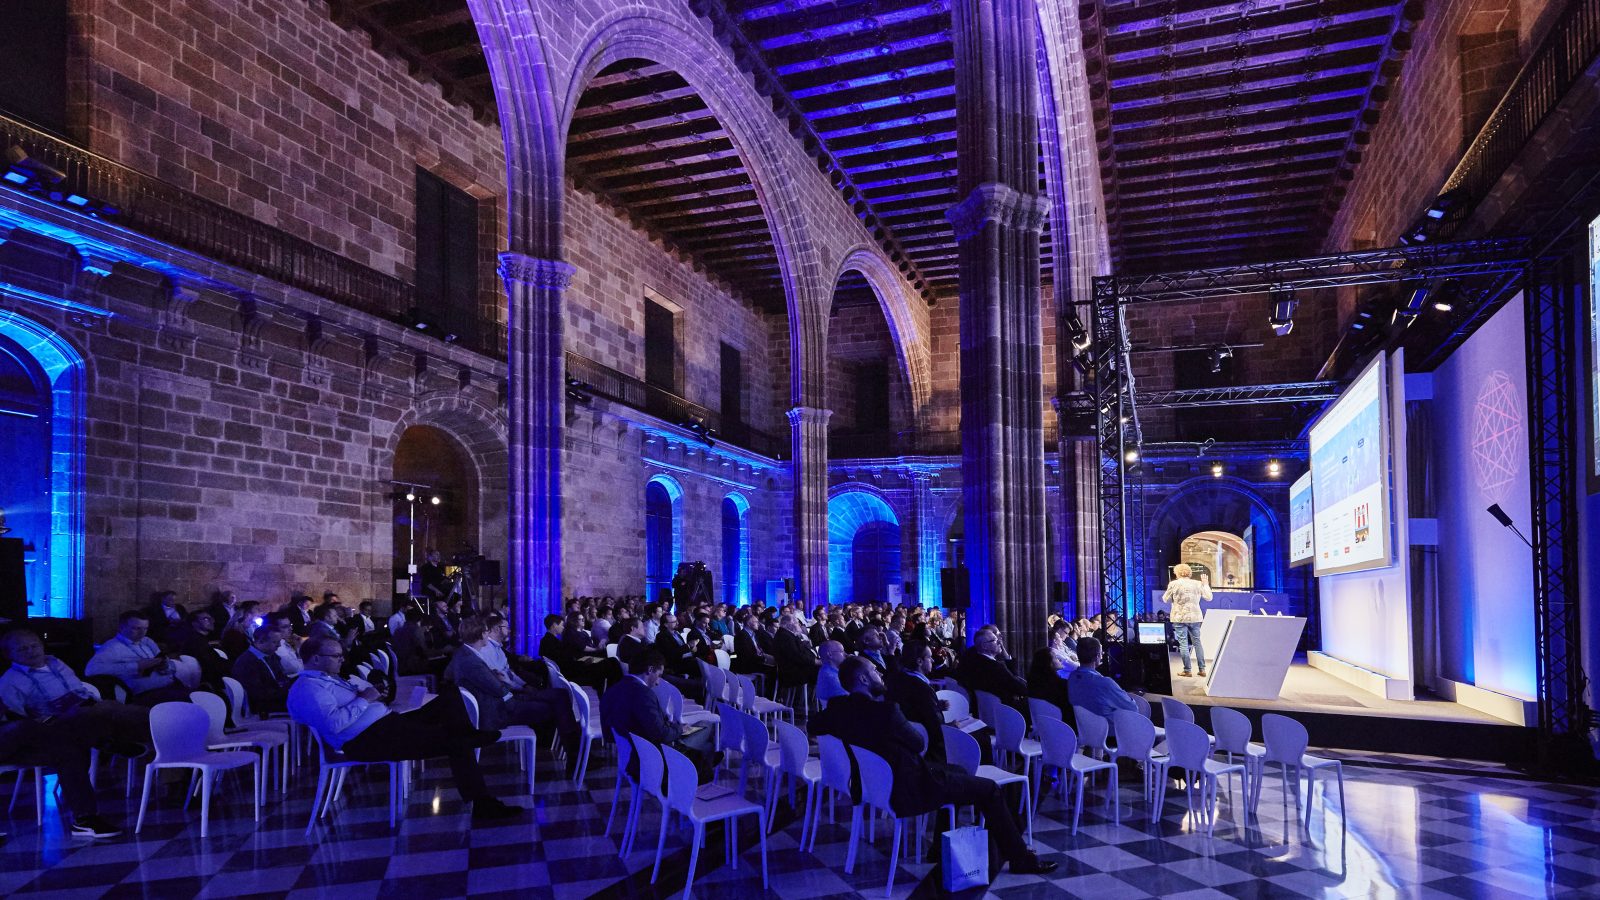 Barcelona classy venue for conference with blue lighting setup